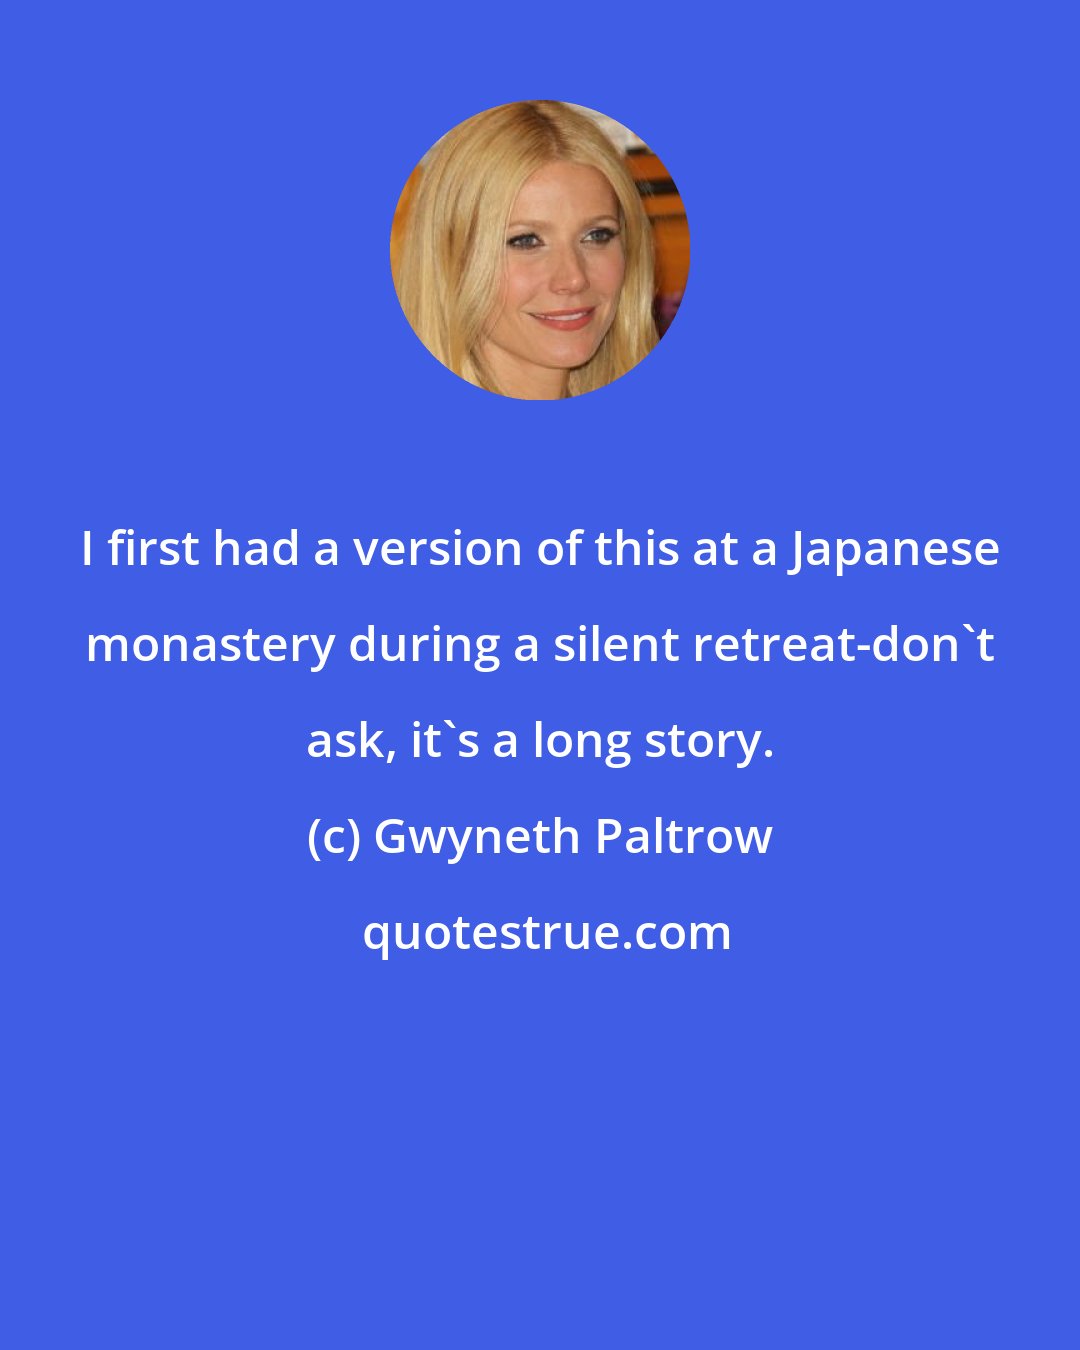 Gwyneth Paltrow: I first had a version of this at a Japanese monastery during a silent retreat-don't ask, it's a long story.